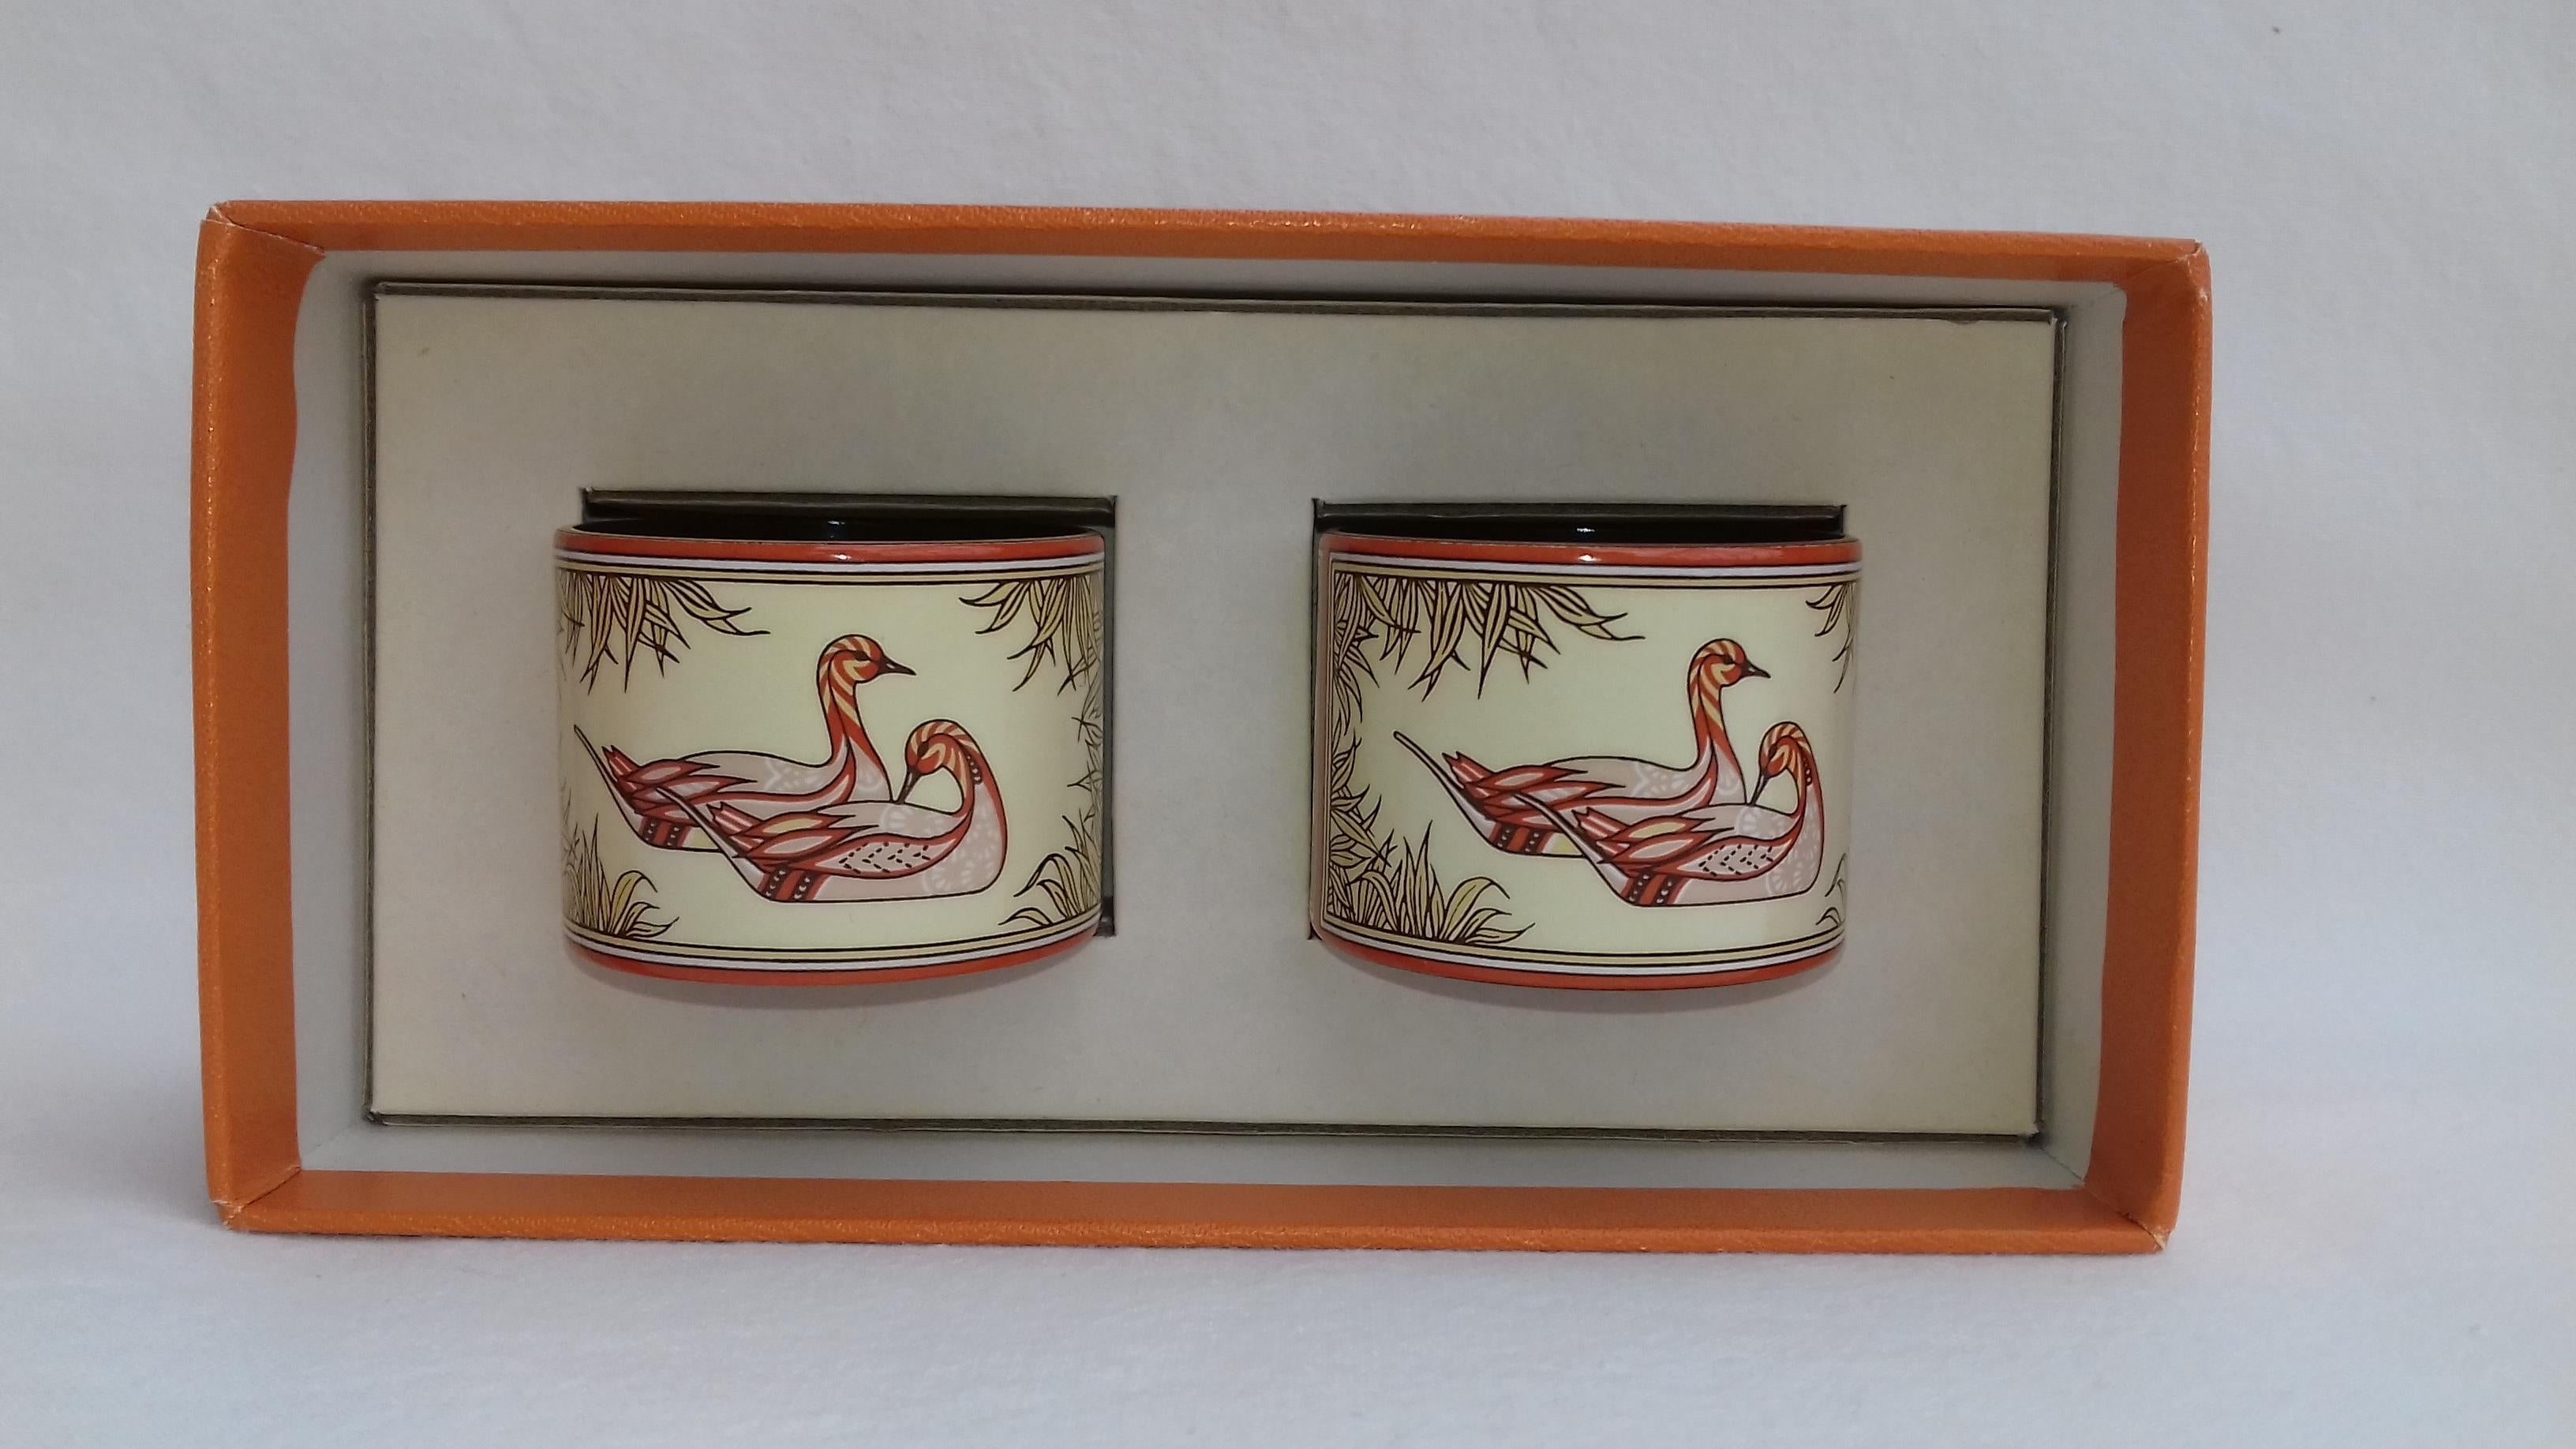 Beautiful Authentic Hermès Napkin Rings

Set of 2 

Pattern: Ducks

Made in Austria

Not dated but probably from the end of the 20th century

Made of Printed Enamel

Colorways: designs in pinkish beige, beige, brick orange tones

Measurements: 4,2